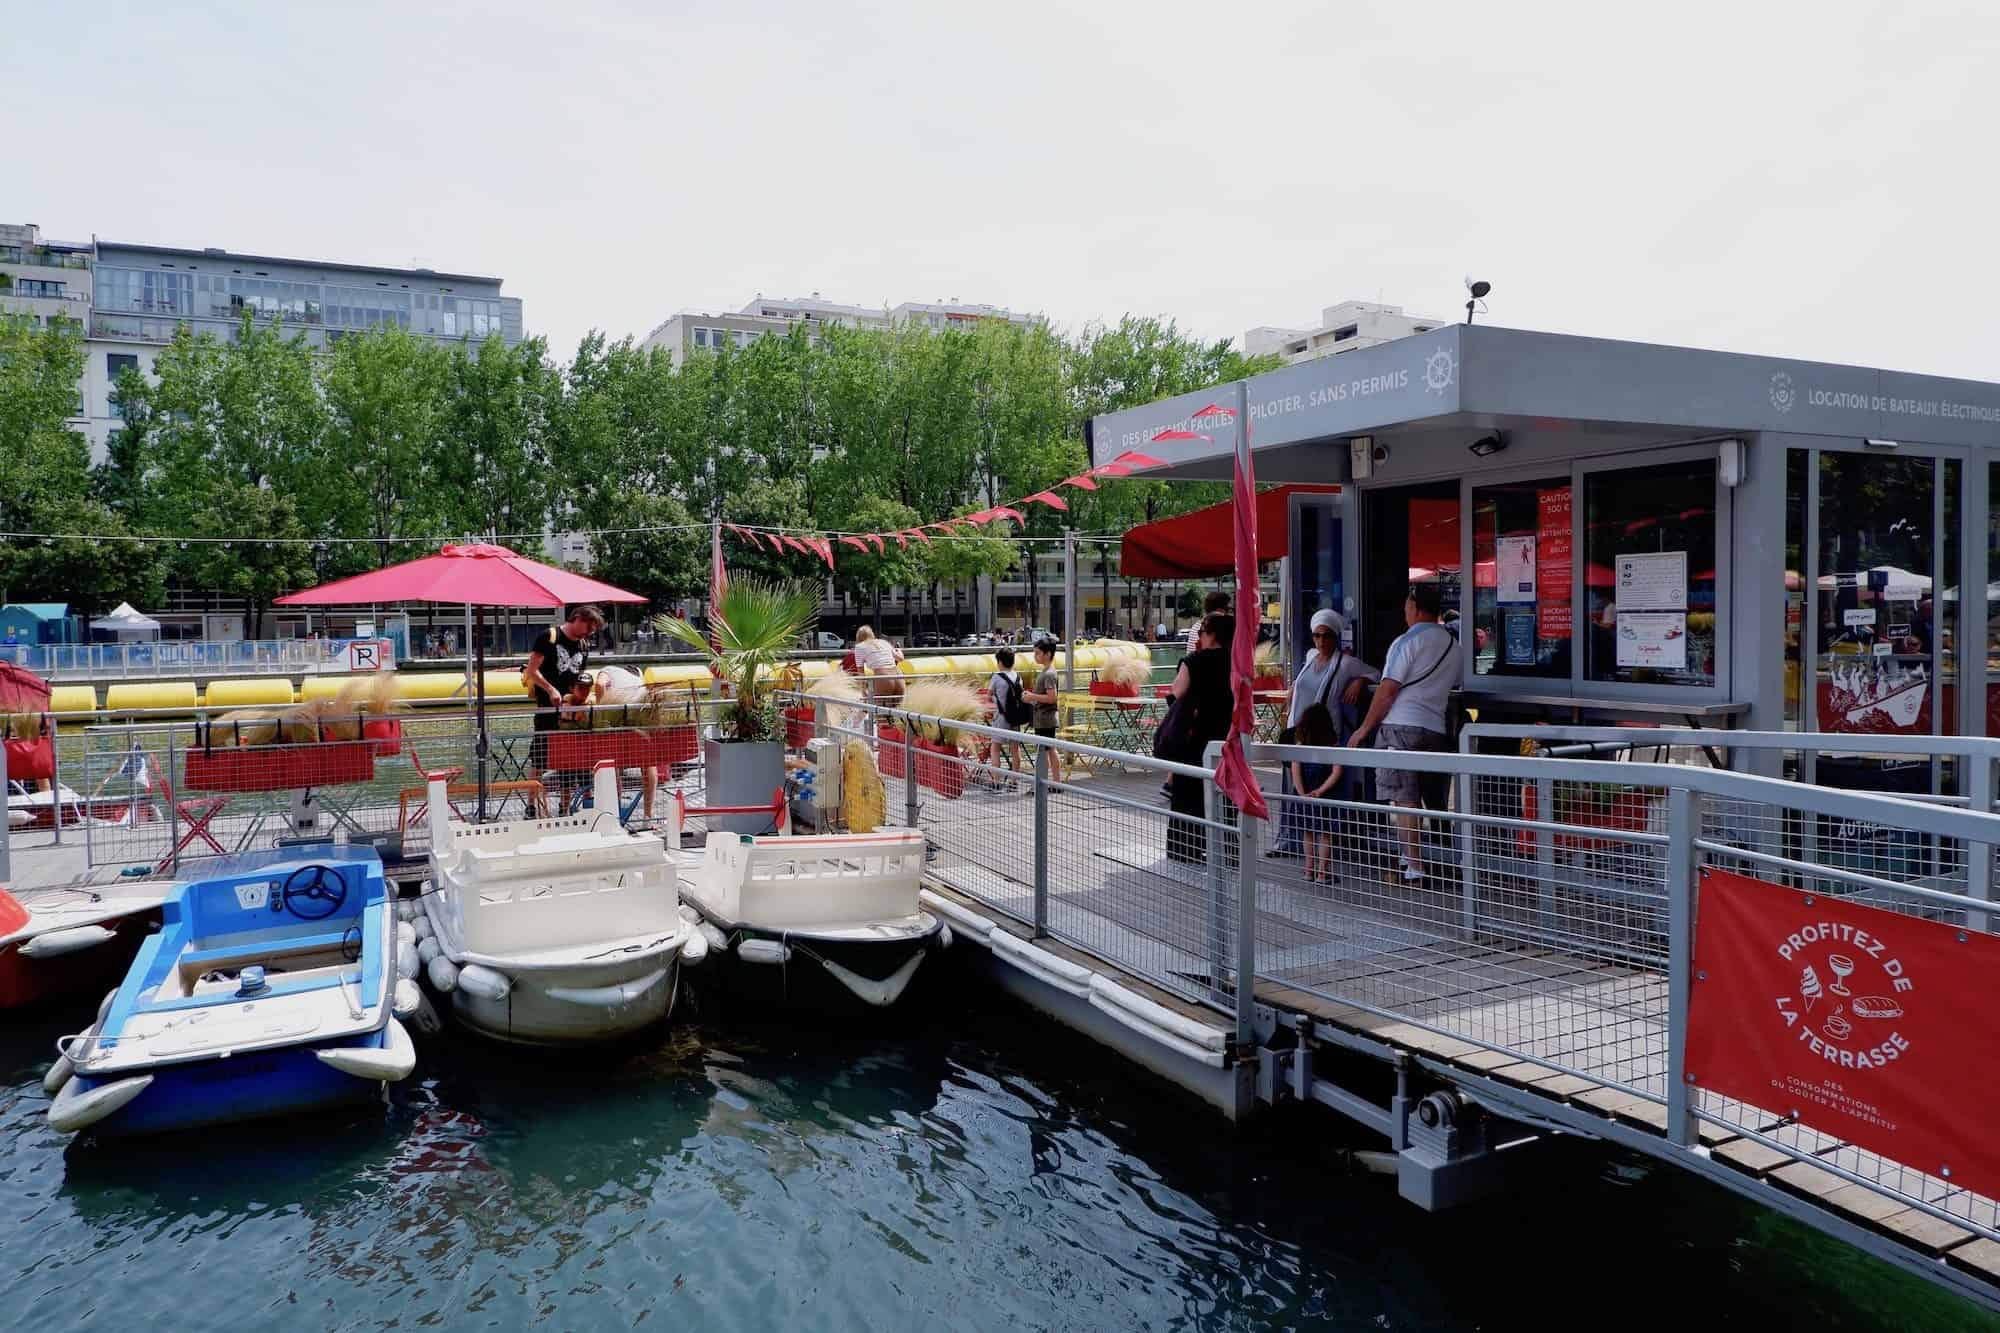 You can rent a small boat to sail along the canal in Paris from this floating pier.